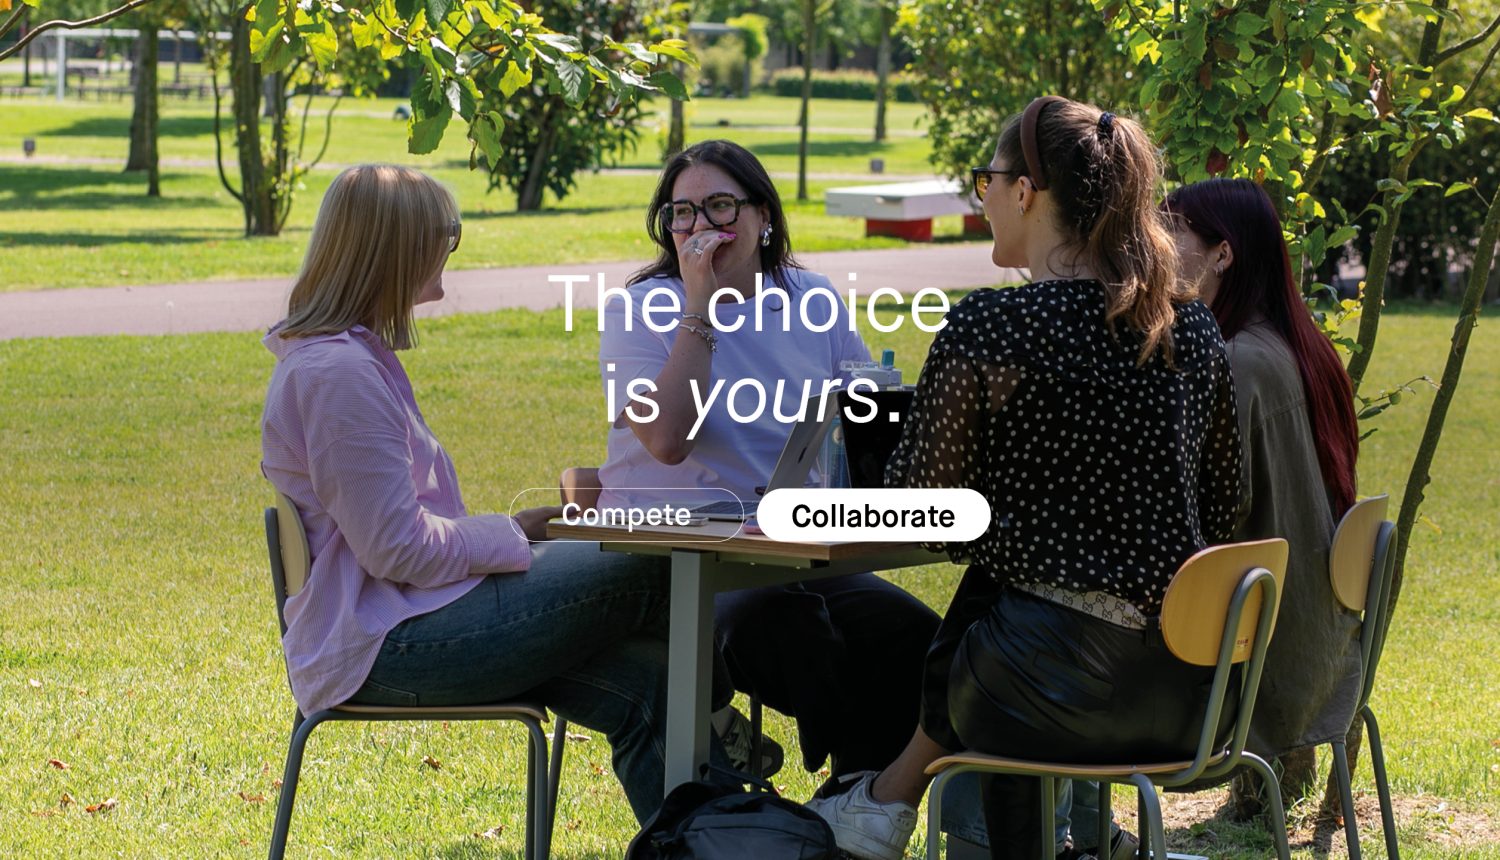 The choice is yours: compete or collaborate?